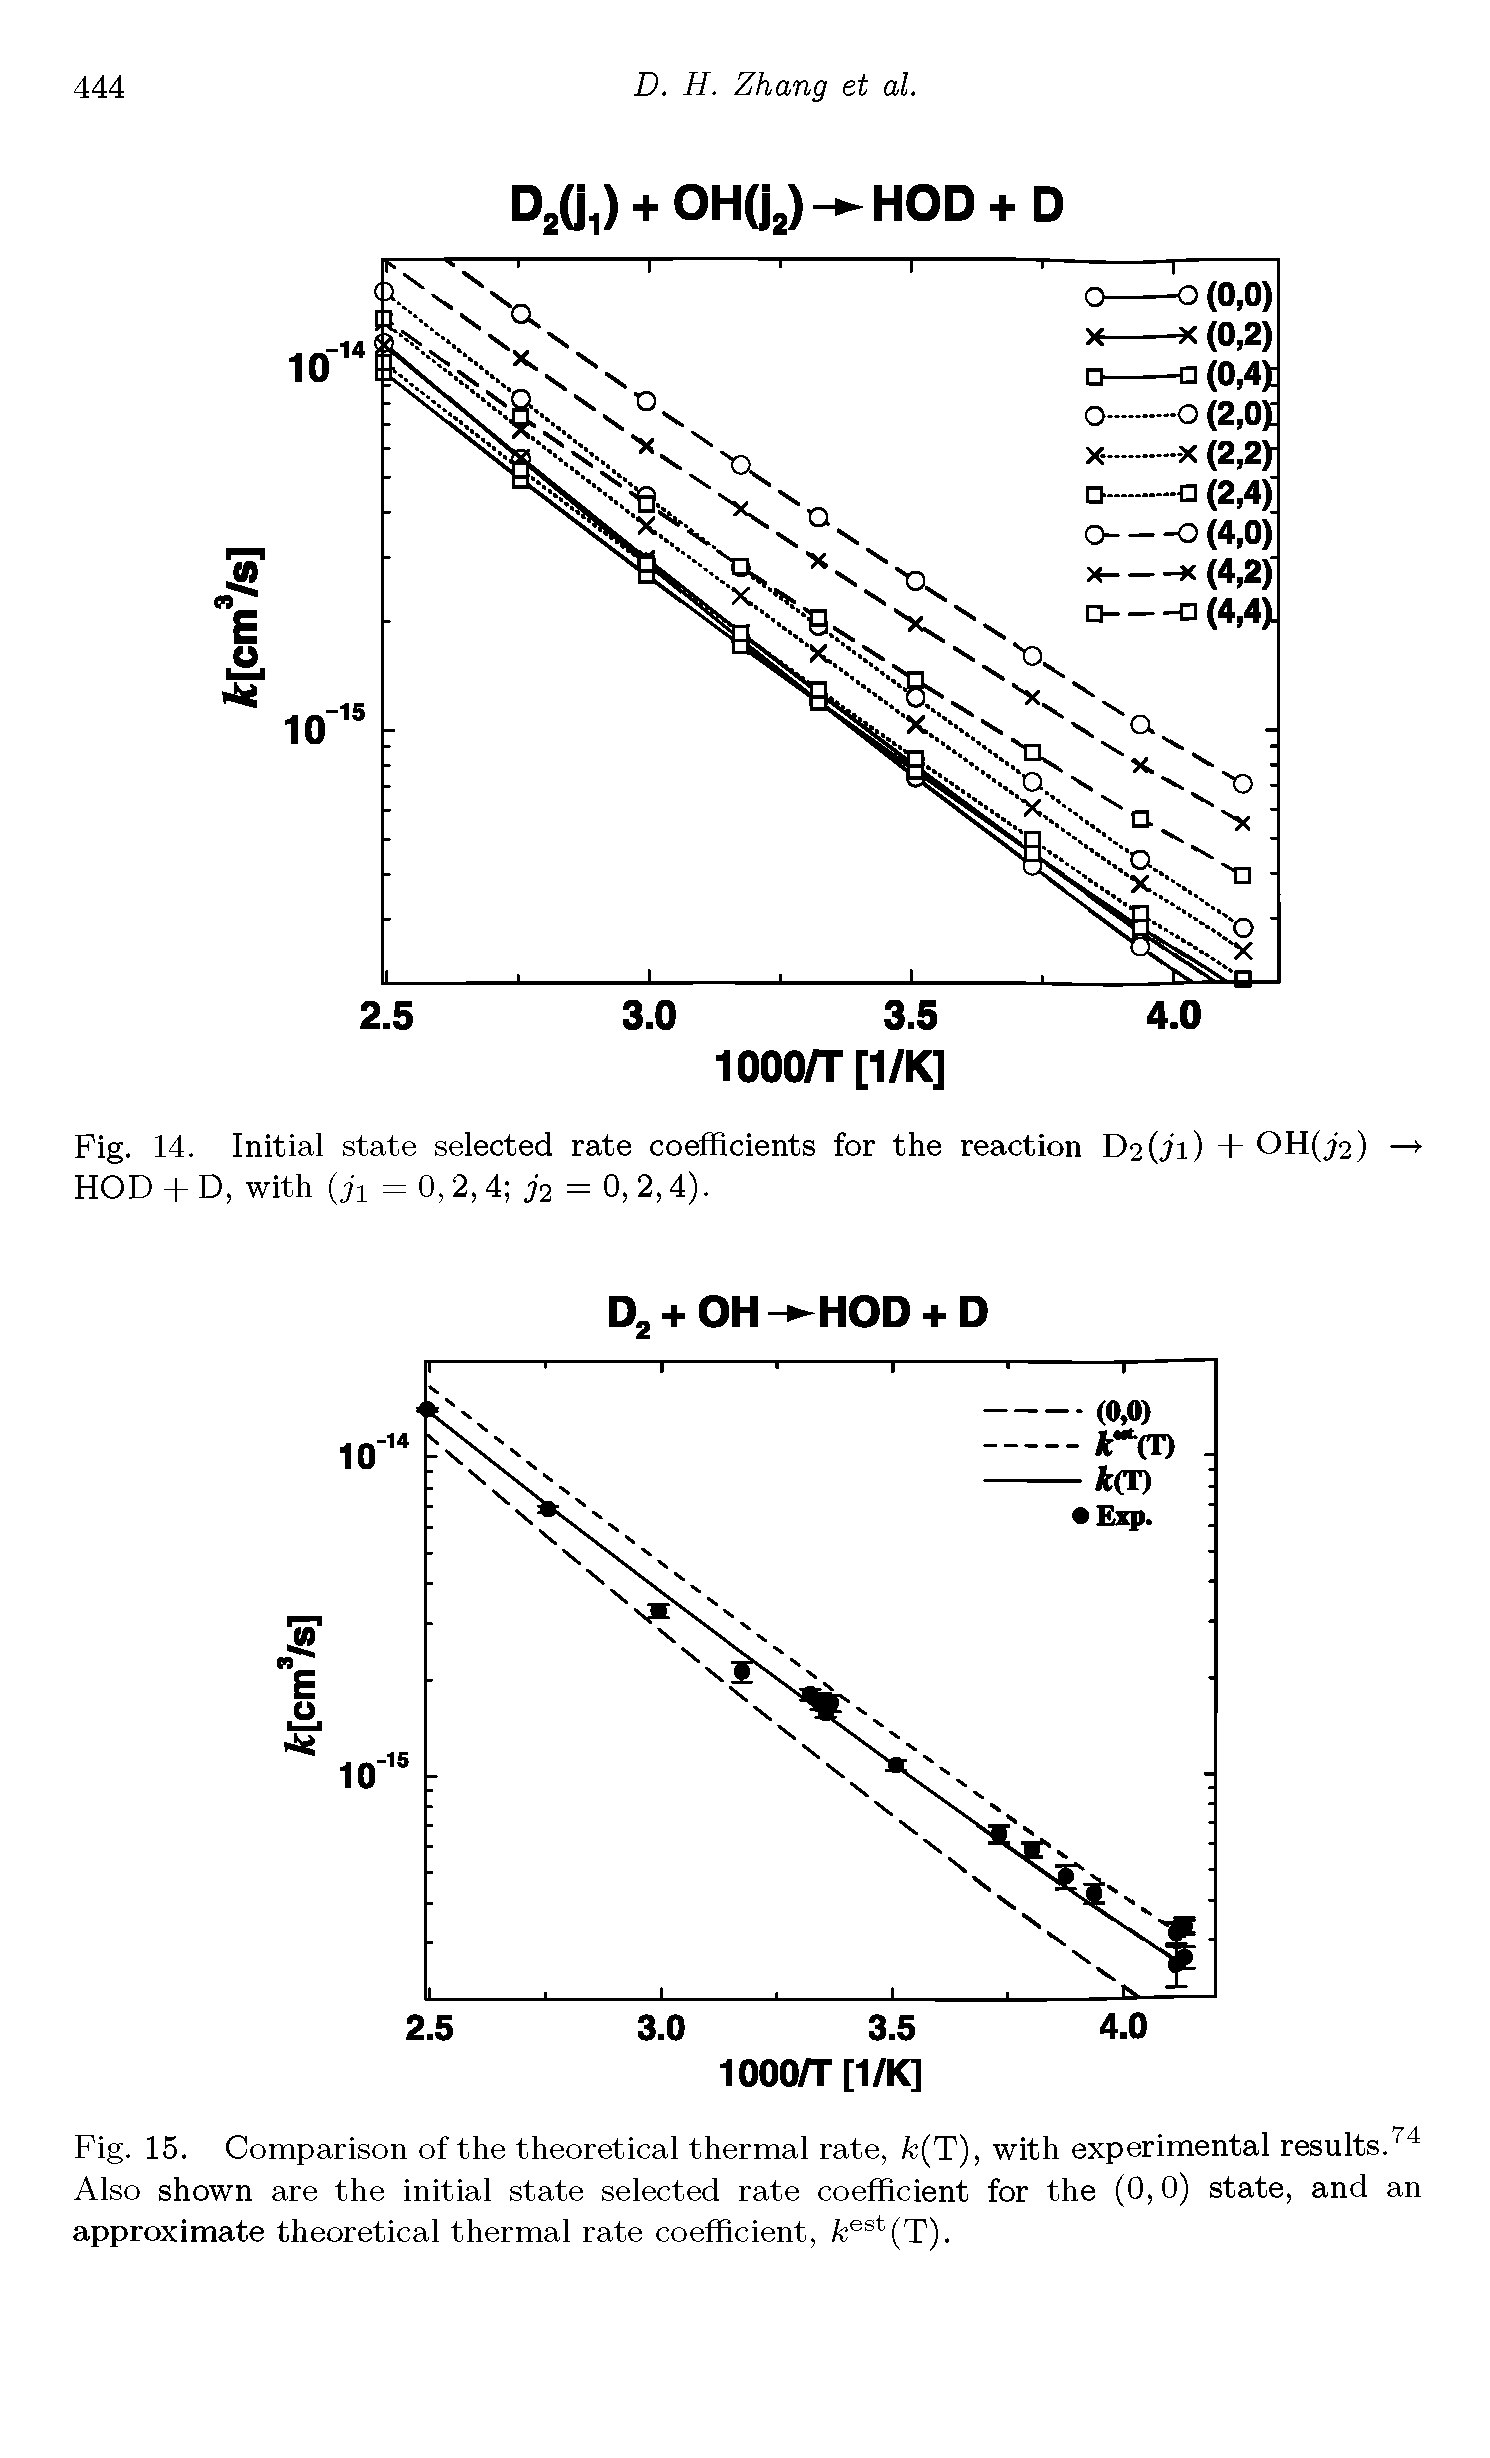 Fig. 15. Comparison of the theoretical thermal rate, fc(T), with experimental results.74 Also shown are the initial state selected rate coefficient for the (0,0) state, and an approximate theoretical thermal rate coefficient, fcest(T).